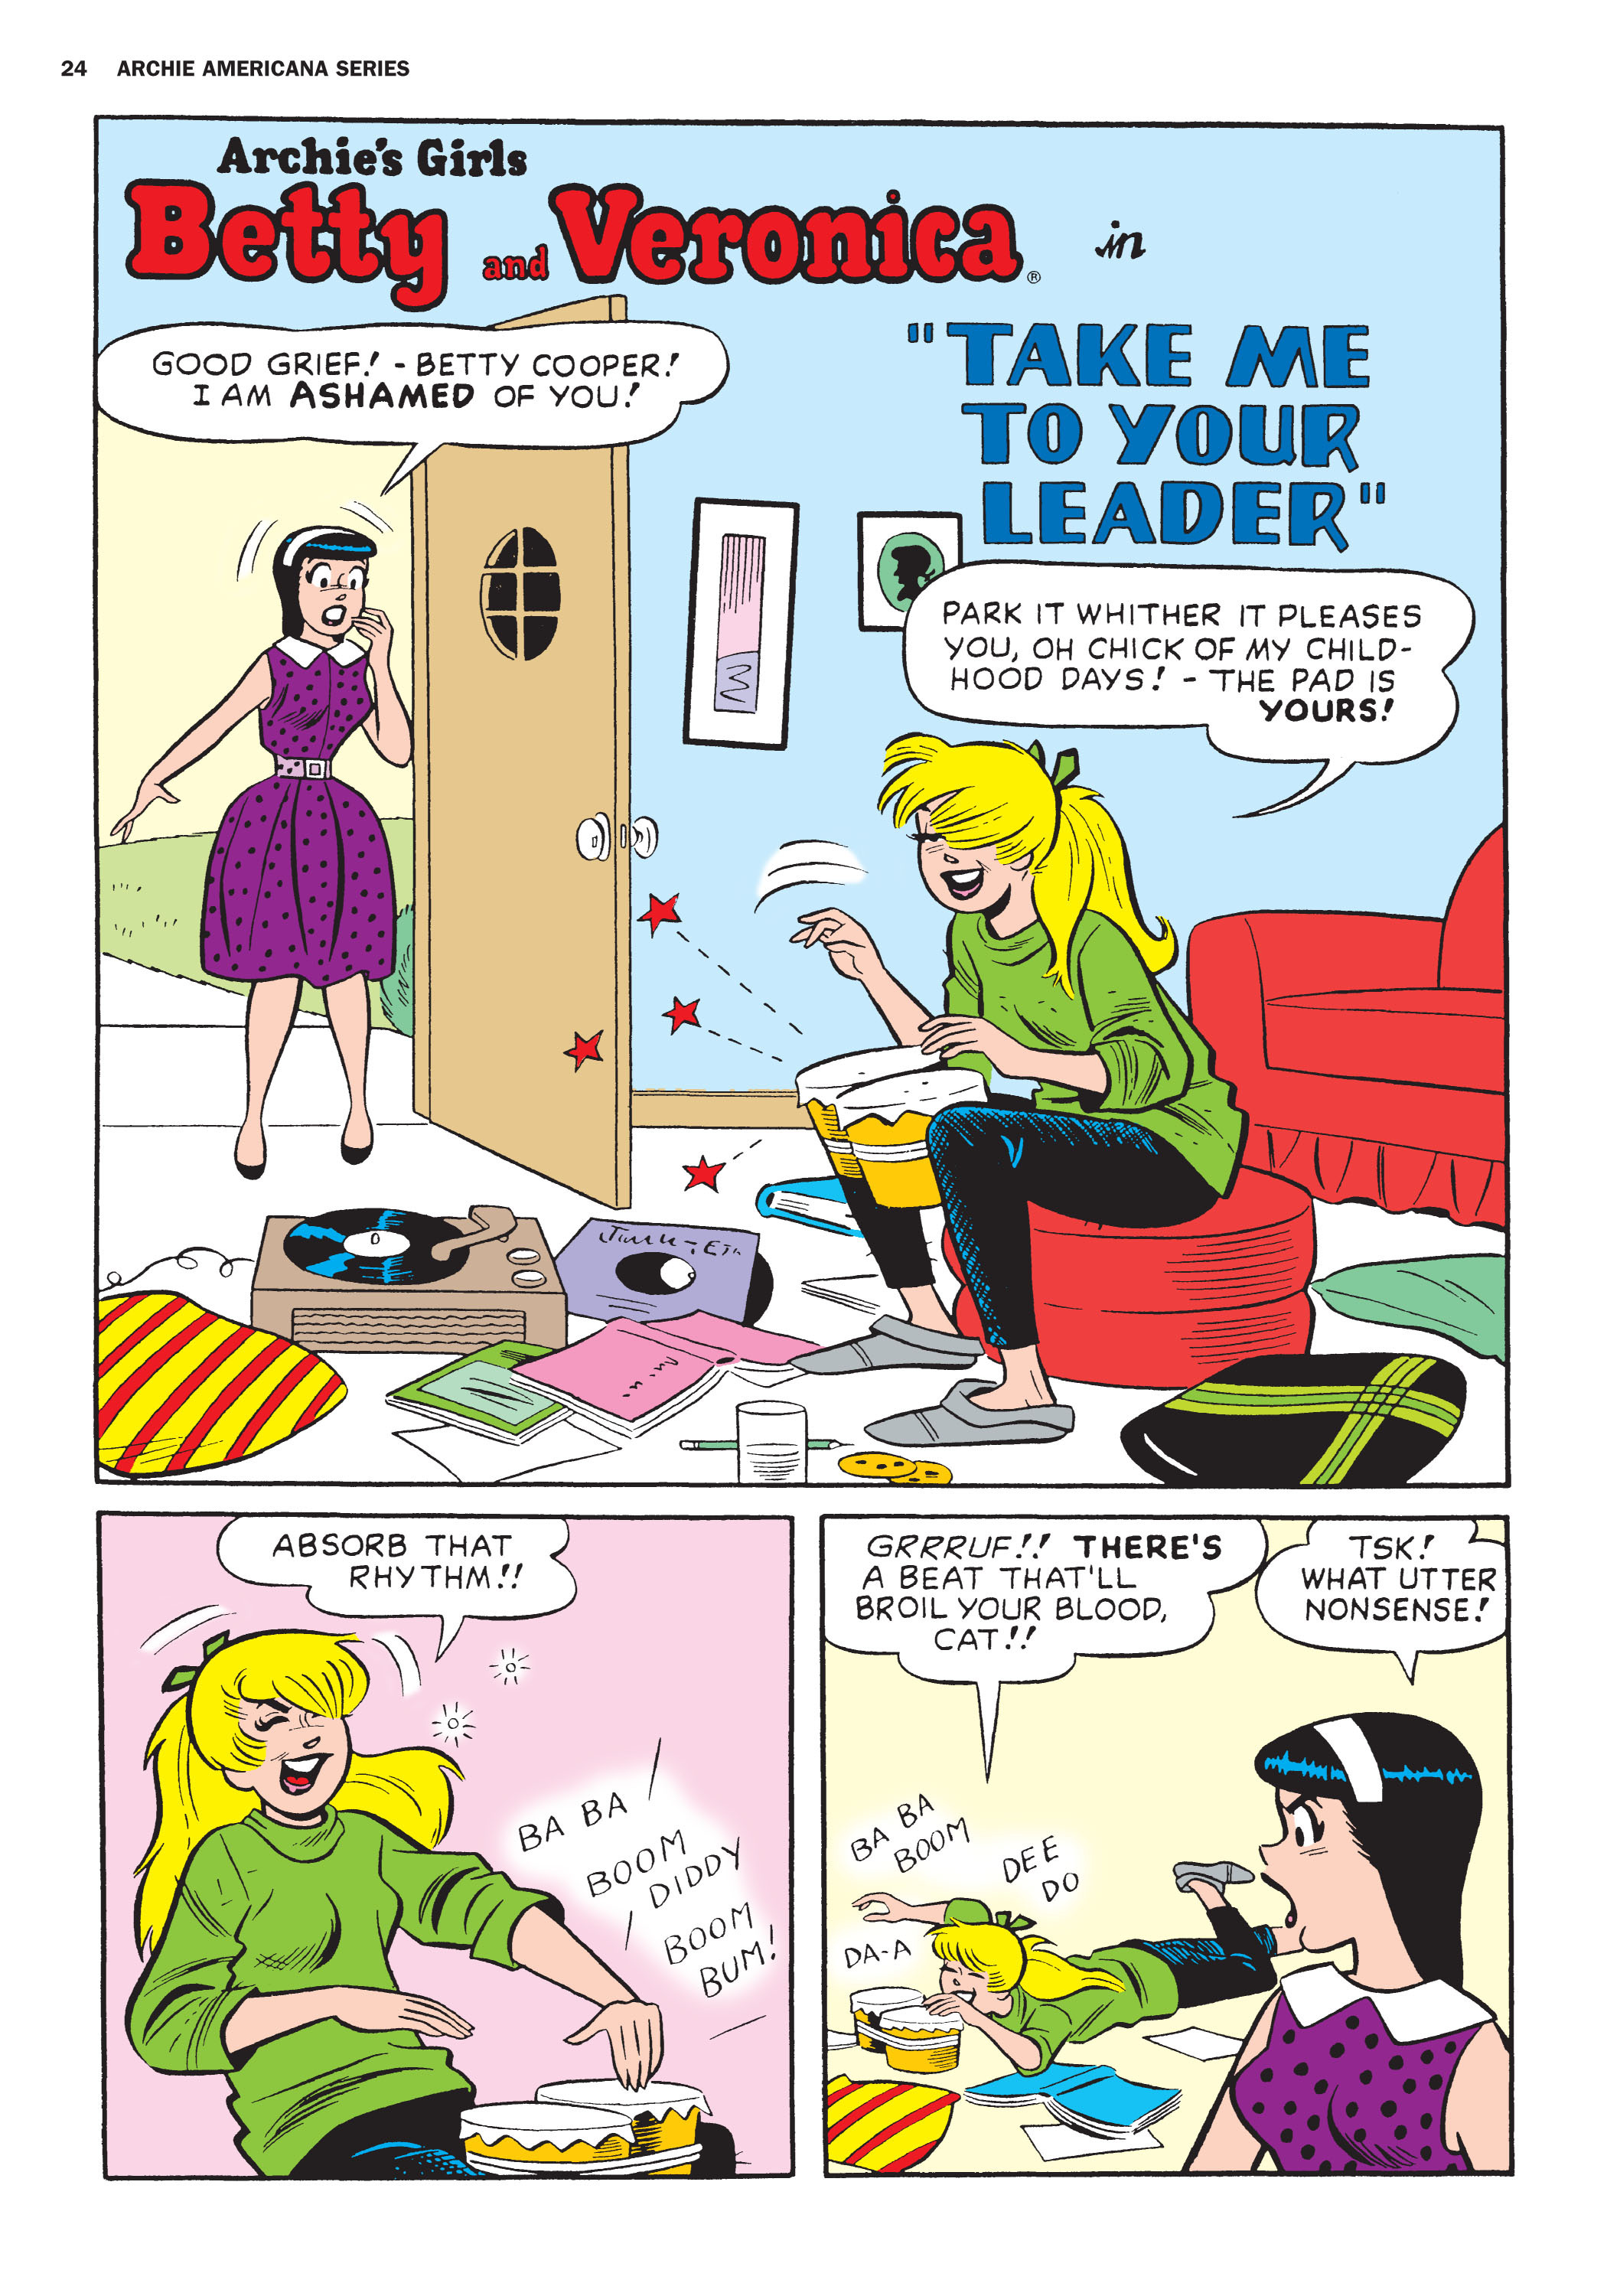 Read online Archie Americana Series comic -  Issue # TPB 8 - 25